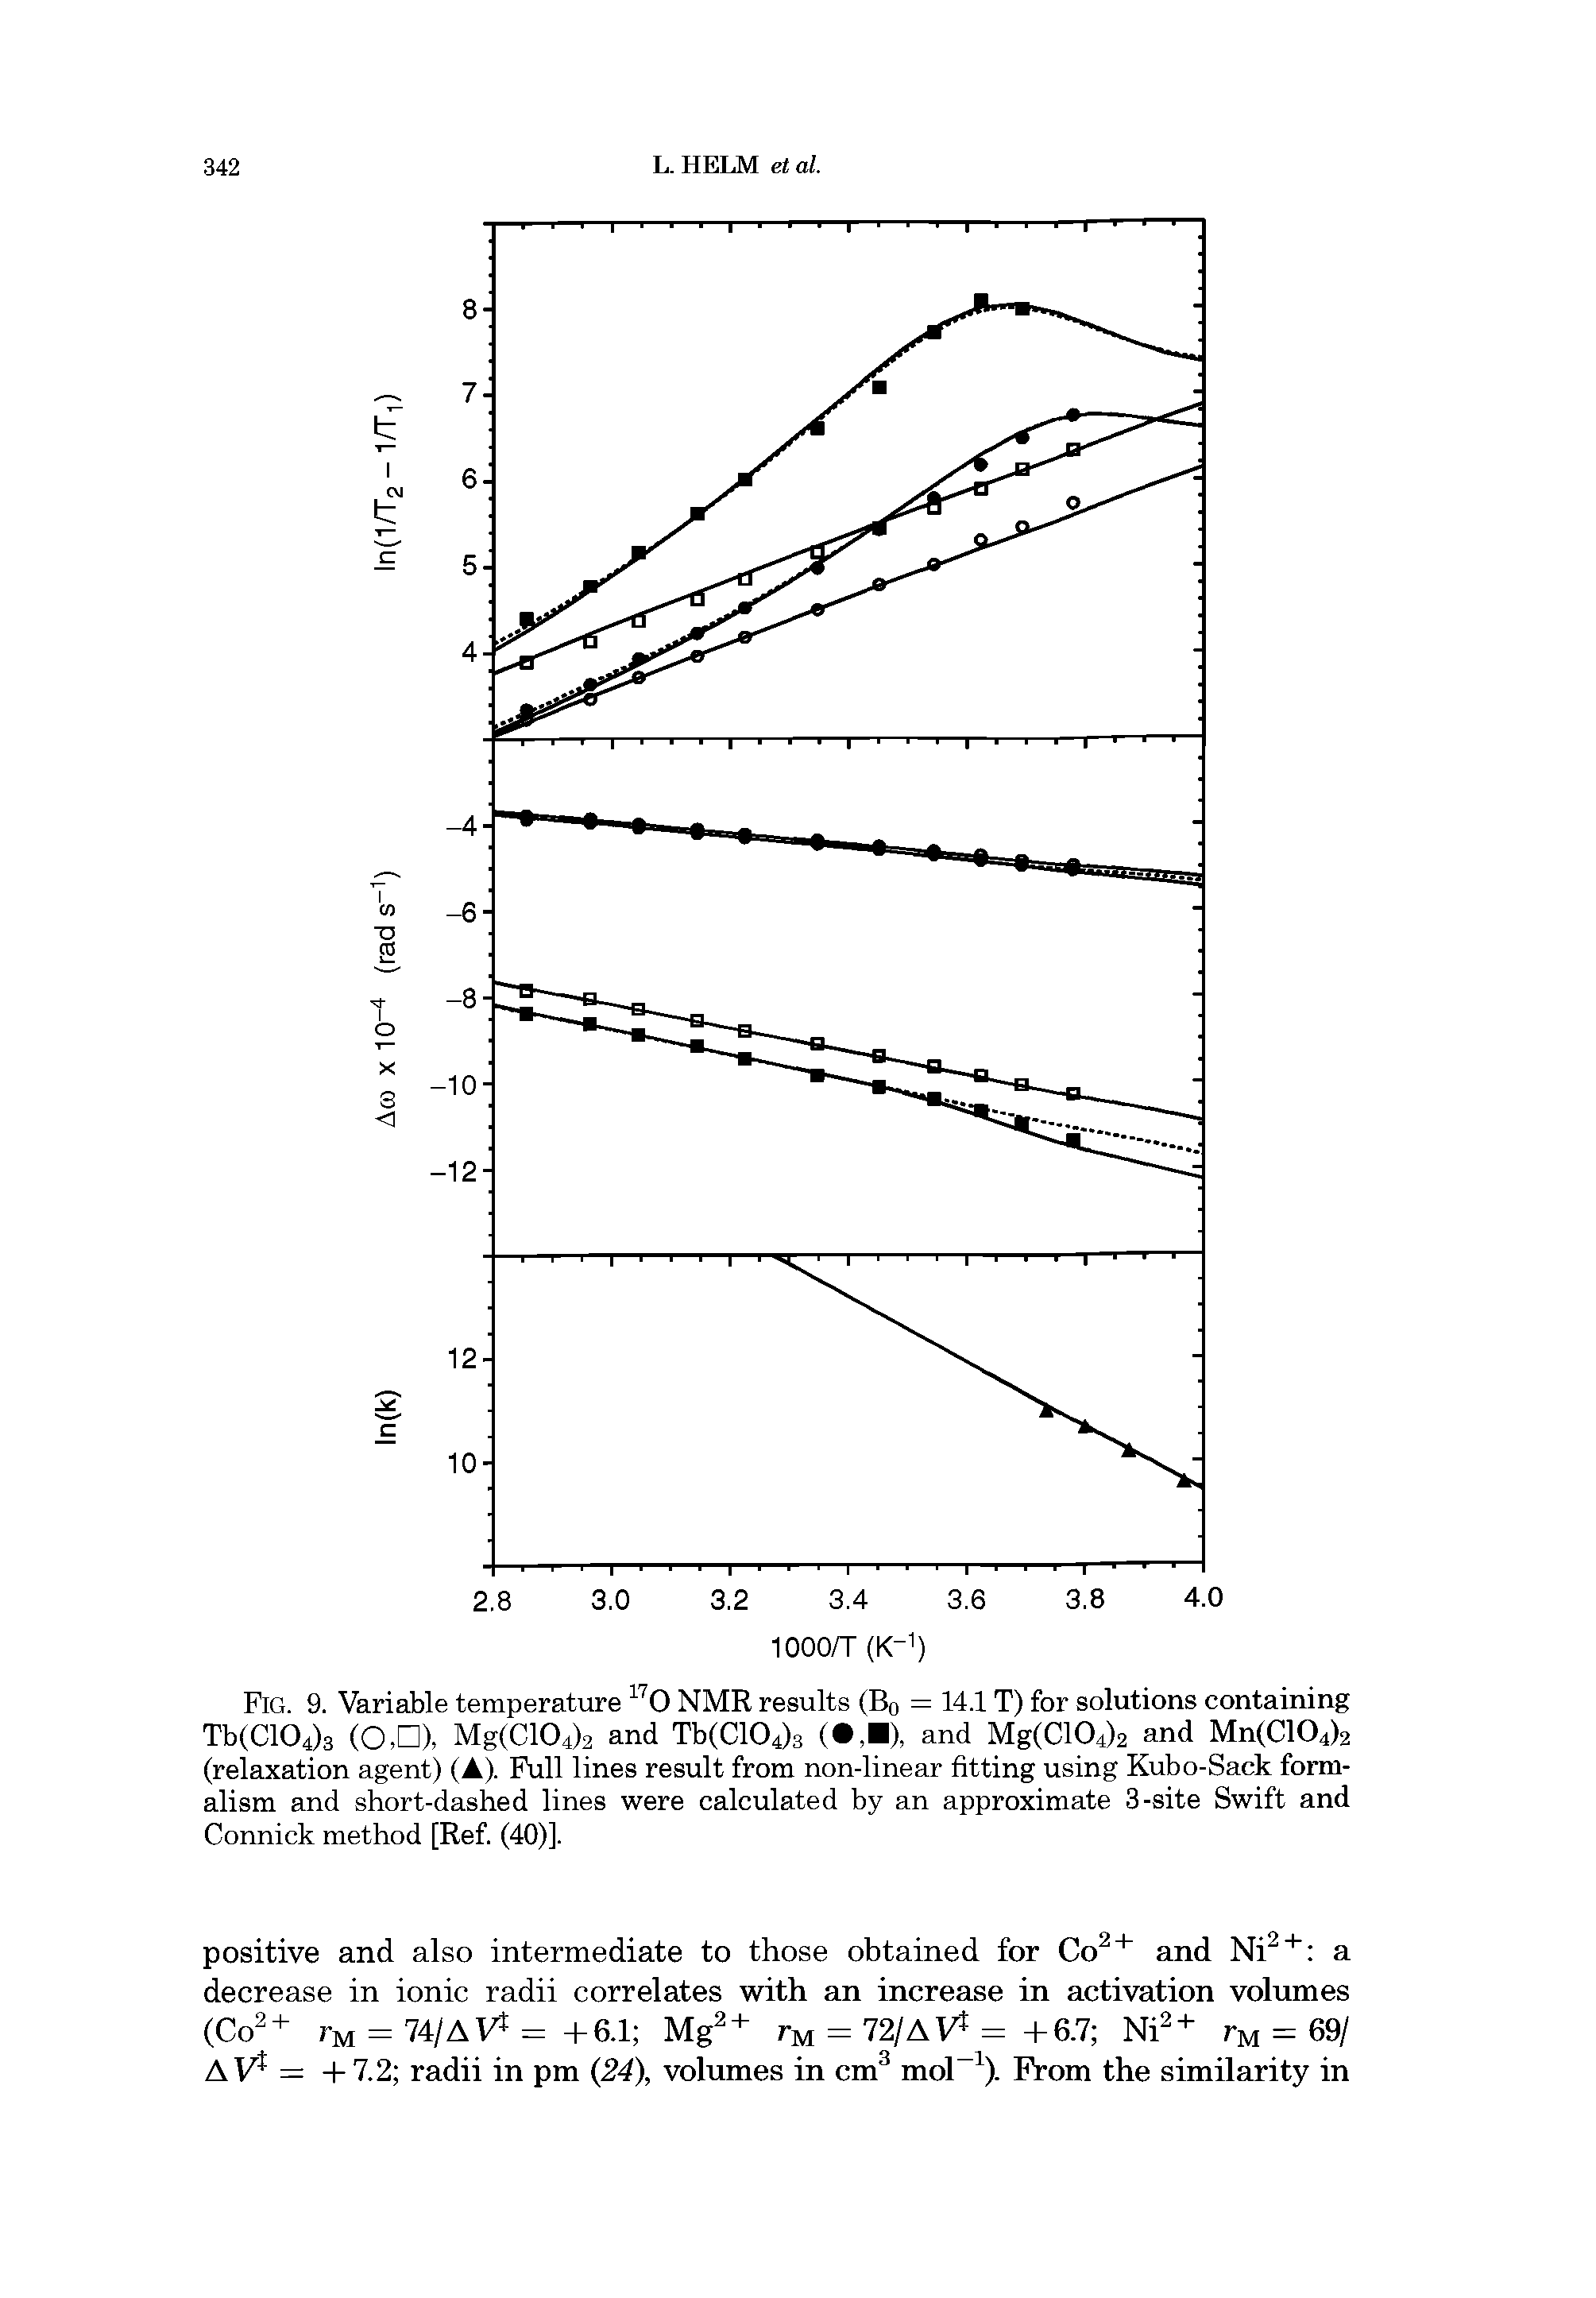 Fig. 9. Variable temperature 0 NMR results (Bq = 14.1 T) for solutions containing Tb(C104)3 (0,DX Mg(C104)2 and Tb(C104)3 ( , ), and Mg(C104)2 and Mn(C104)2 (relaxation agent) (A). Full lines result from non-linear fitting using Kubo-Sack formalism and short-dashed lines were calculated by an approximate 3-site Swift and Connick method [Ref. (40)].